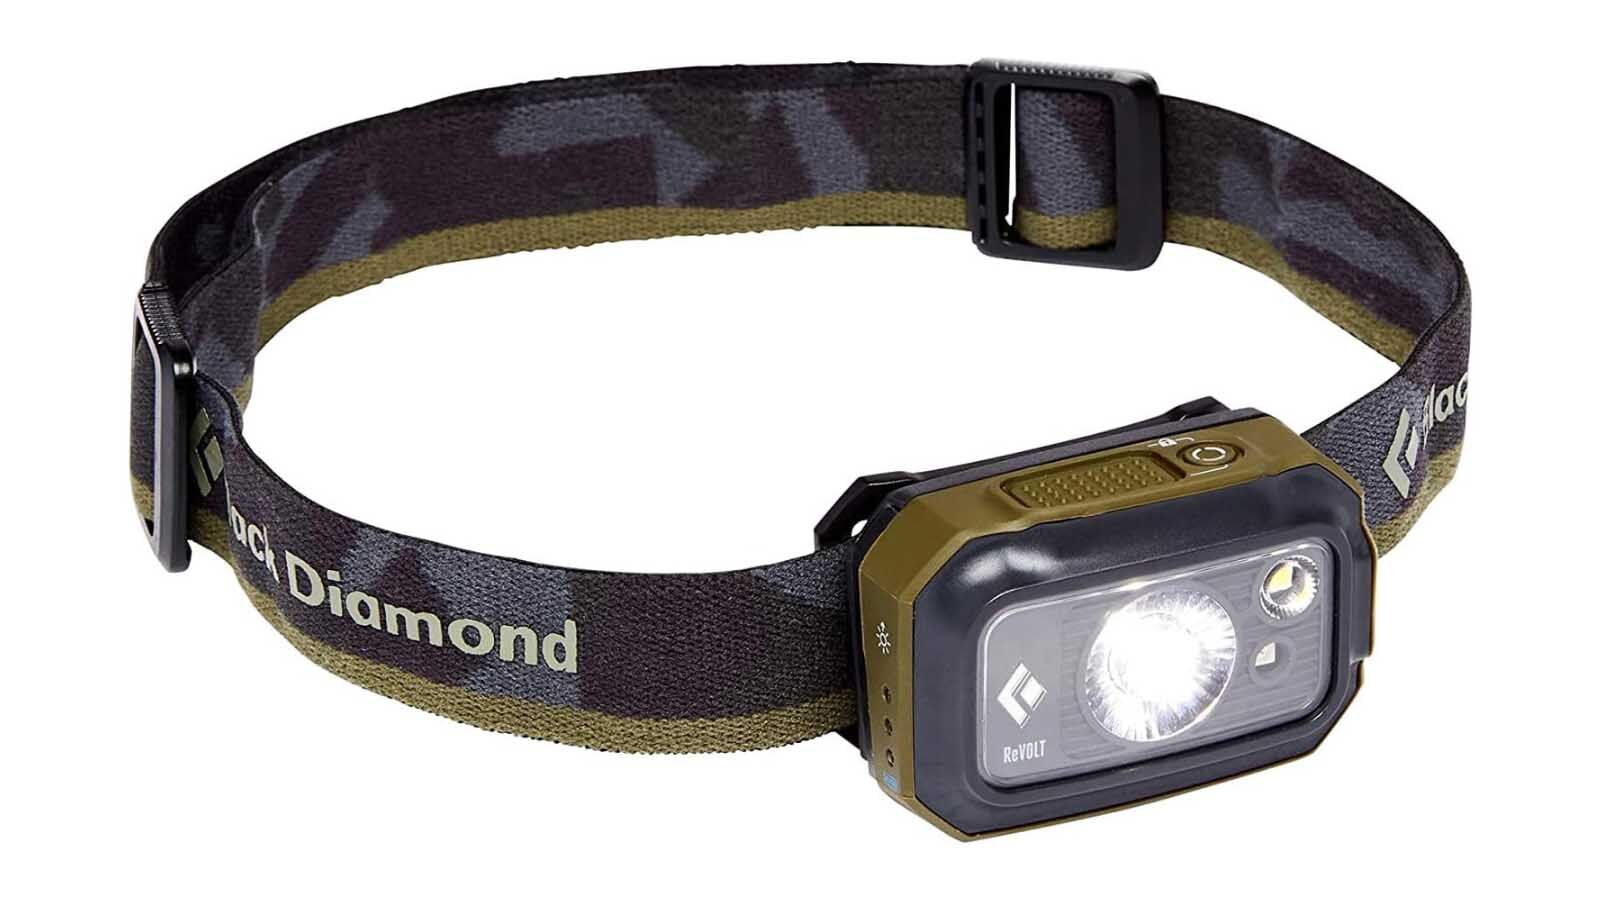 Hiking Headlamp gifts for adventure travelers